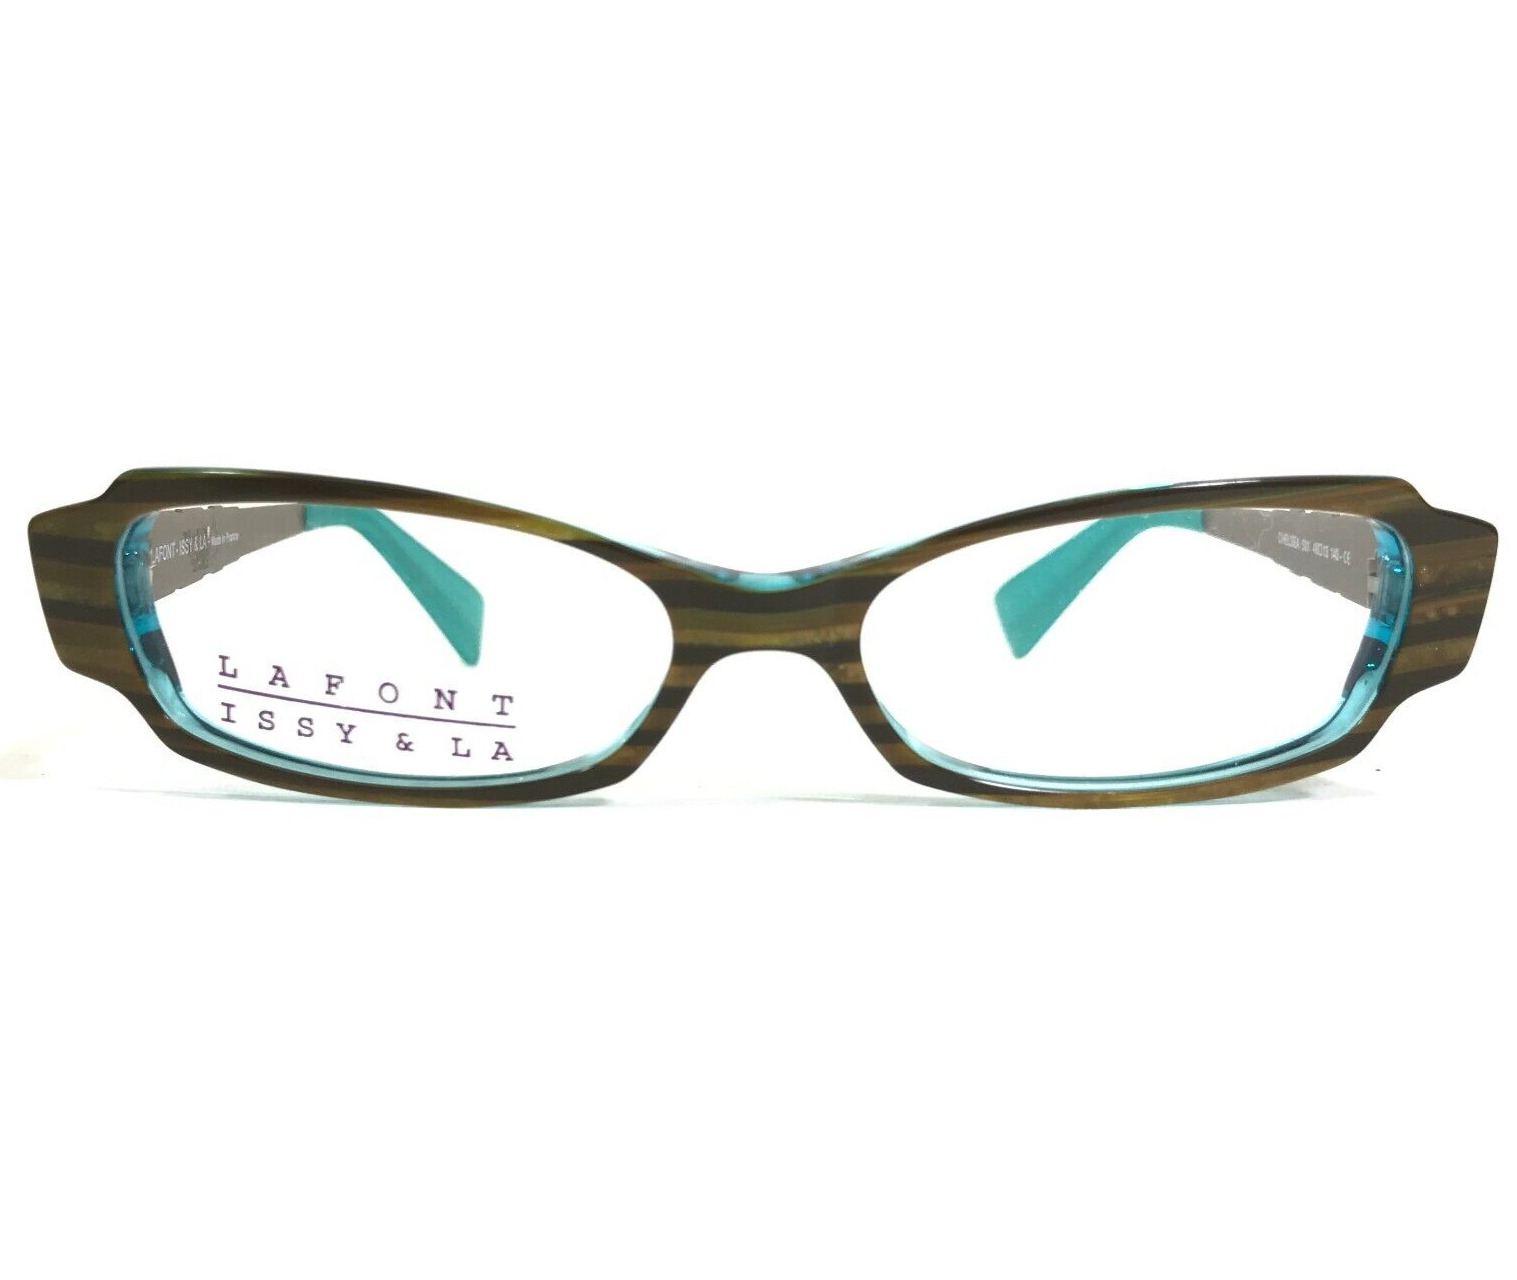 Primary image for Lafont Issy & LA Petite Eyeglasses Frames CHELSEA 501 Blue Brown 48-13-140